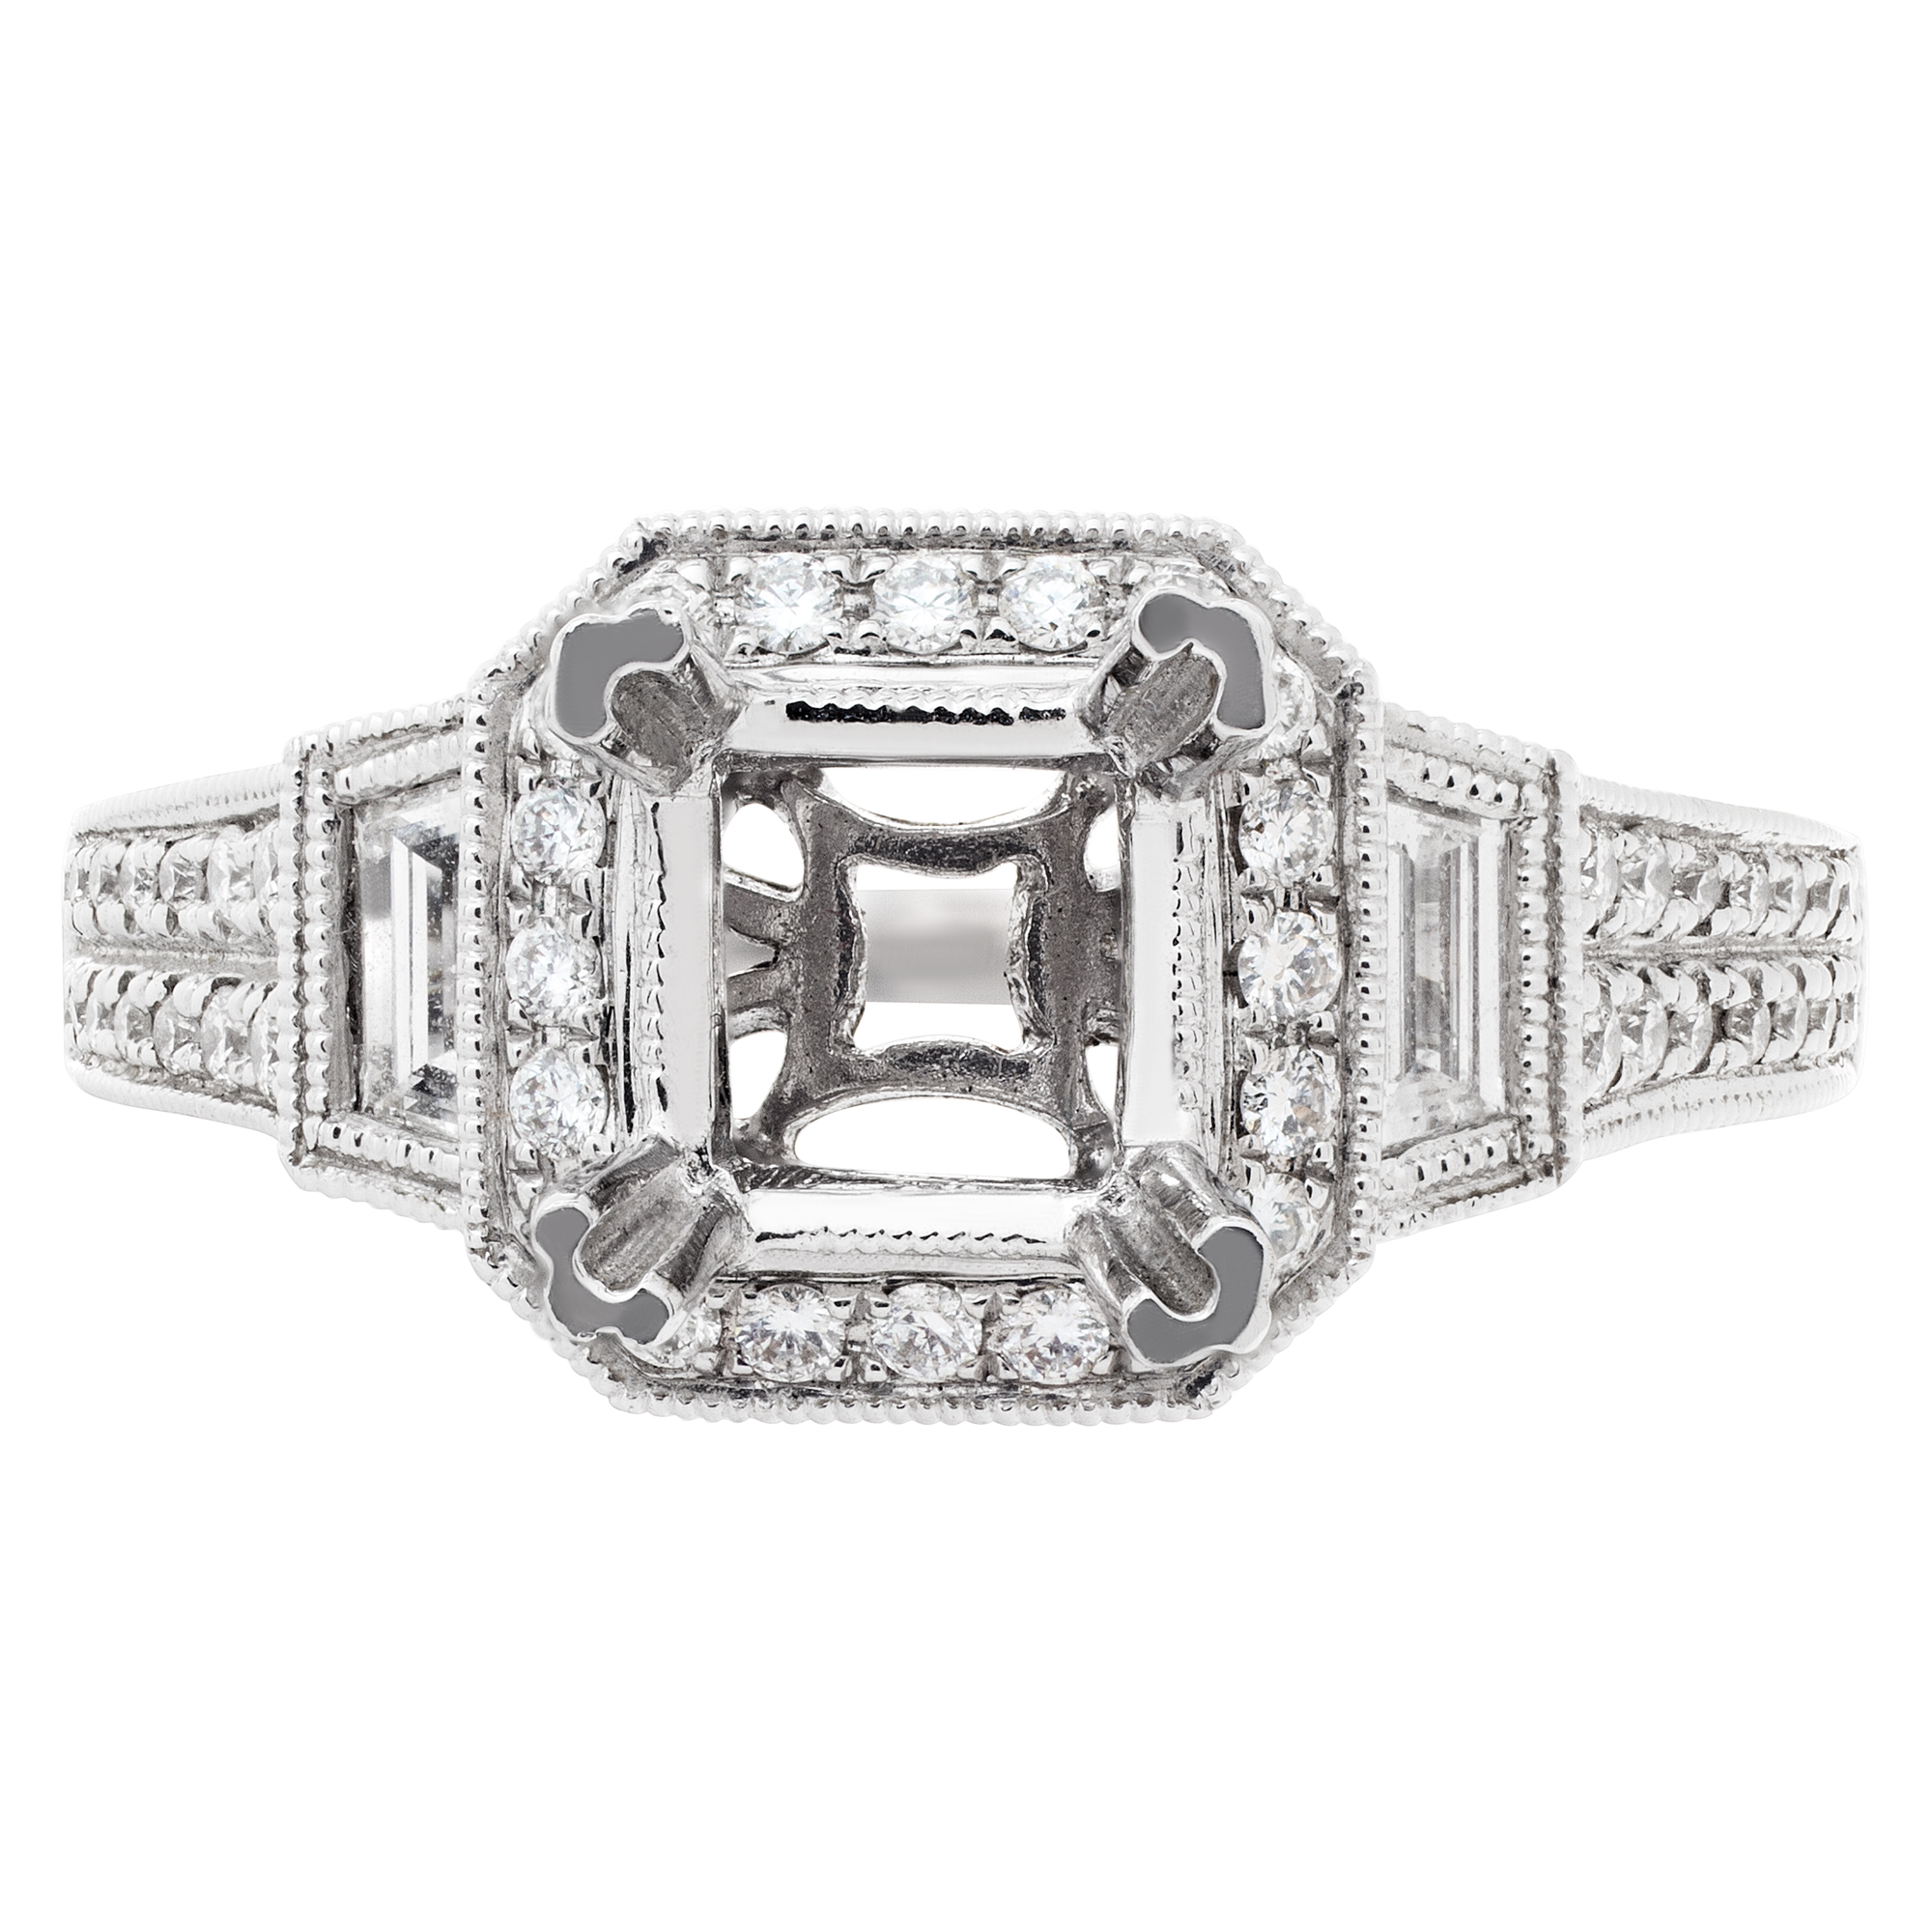 18k white gold mounting for approx. 1 carat square stone, with approx. 1.64 carat diamond. Size 5.5 image 2